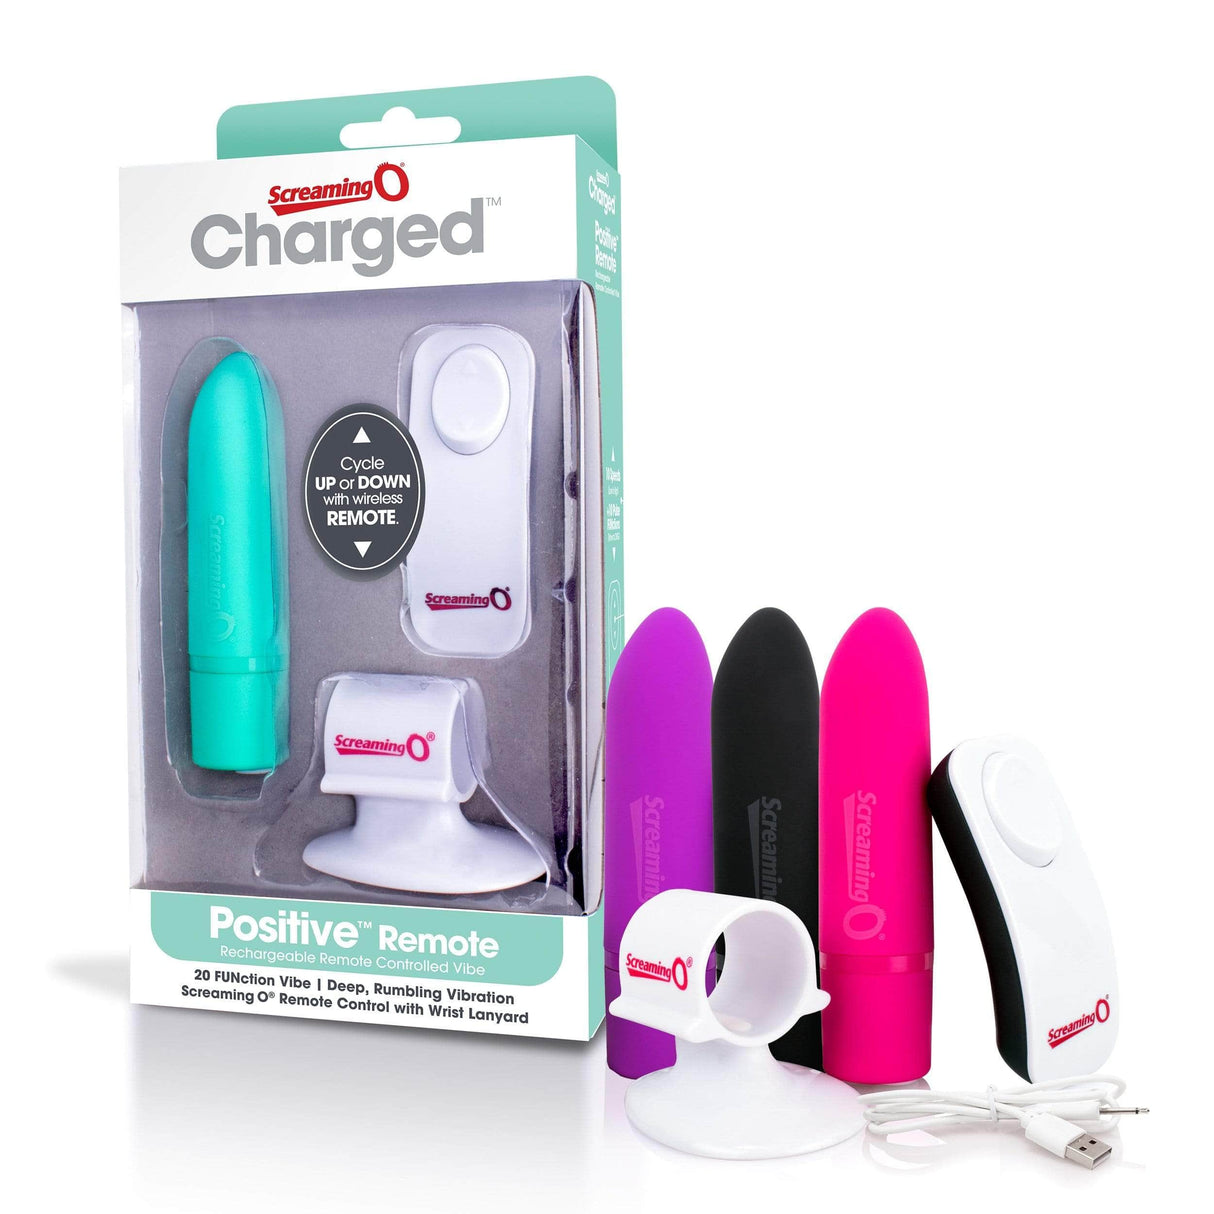 TheScreamingO - Charged Positive Remote Control Vibrator CherryAffairs